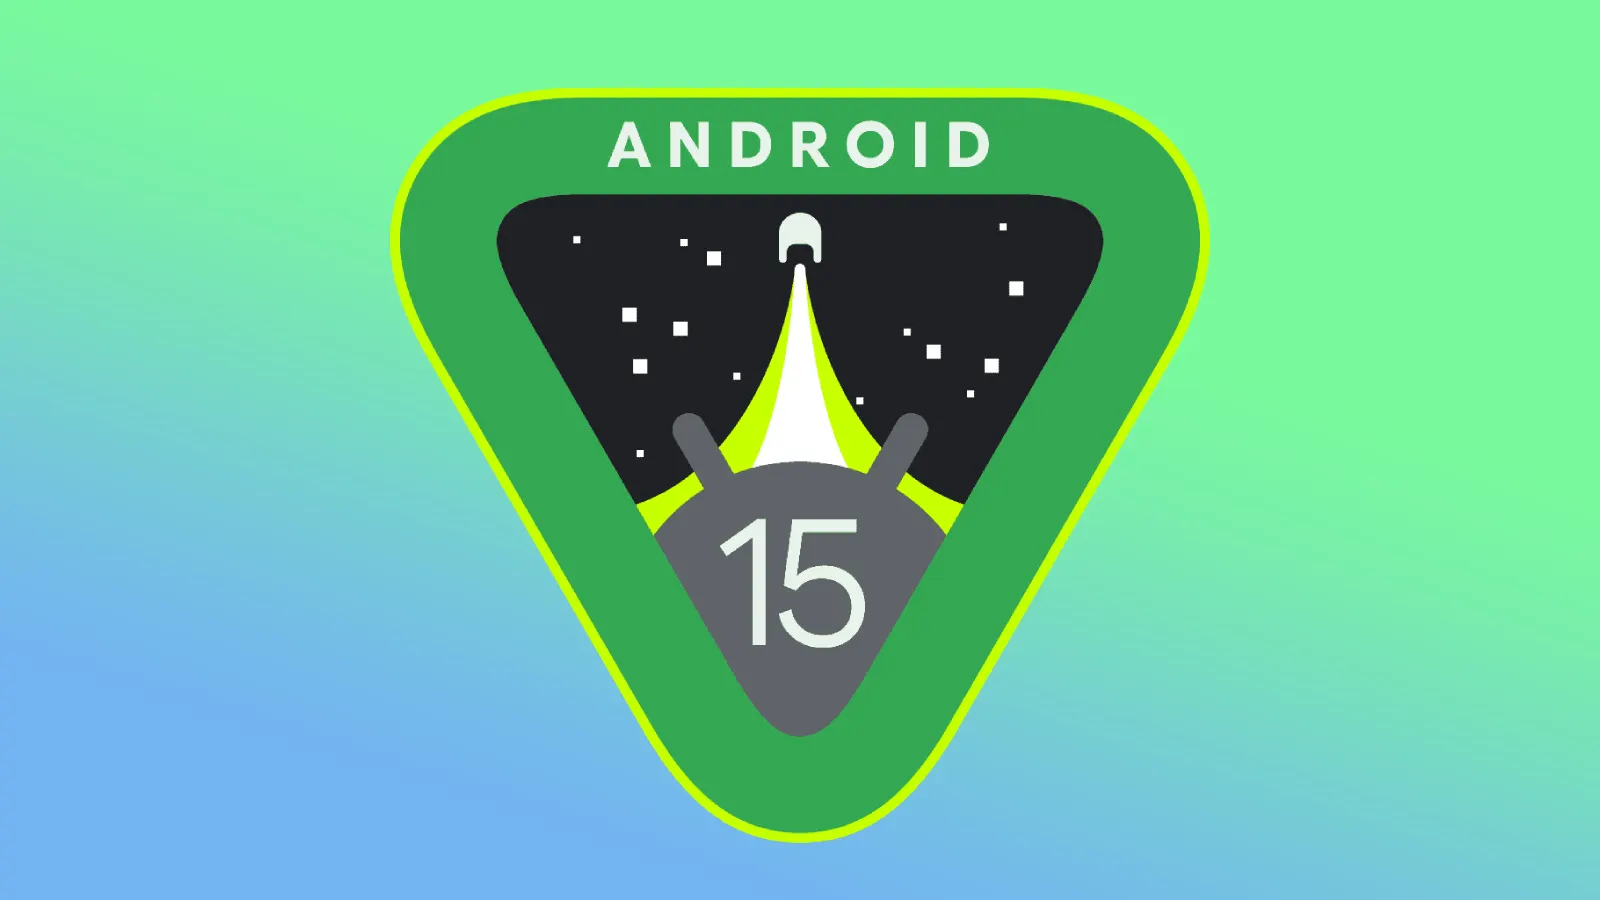 Google Android 15